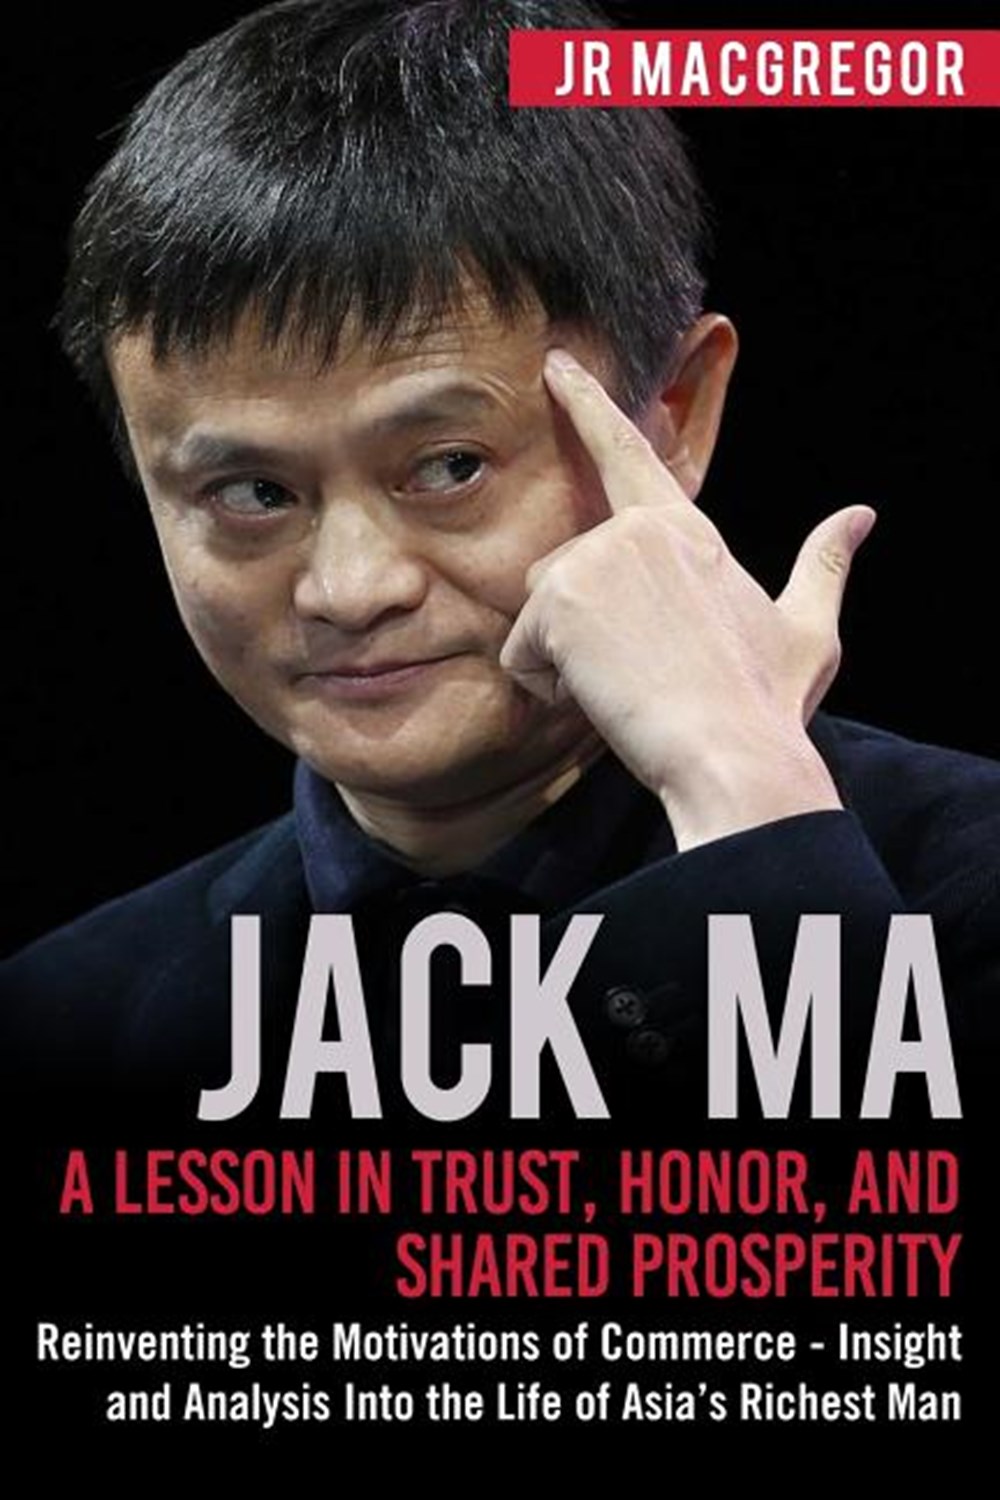 Jack Ma A Lesson in Trust, Honor, and Shared Prosperity: Reinventing the Motivations of Commerce - I